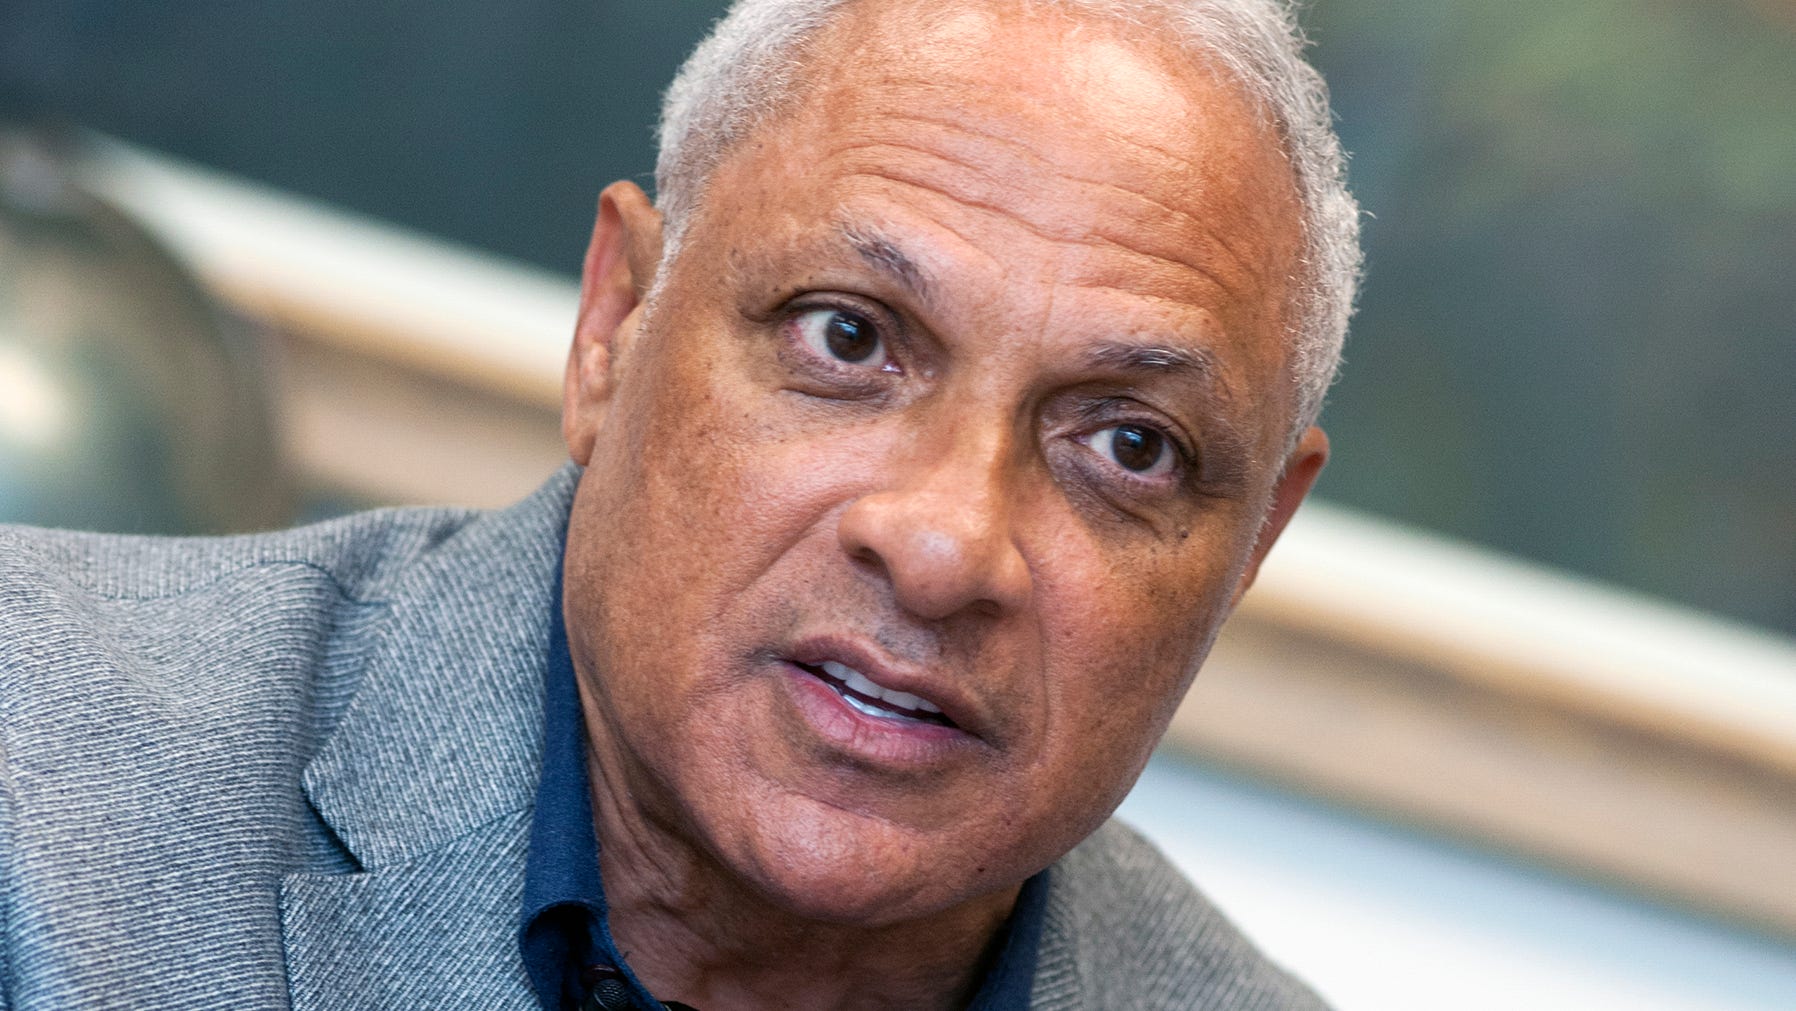 Senate candidate Mike Espy appointed Madison County supervisors' attorney